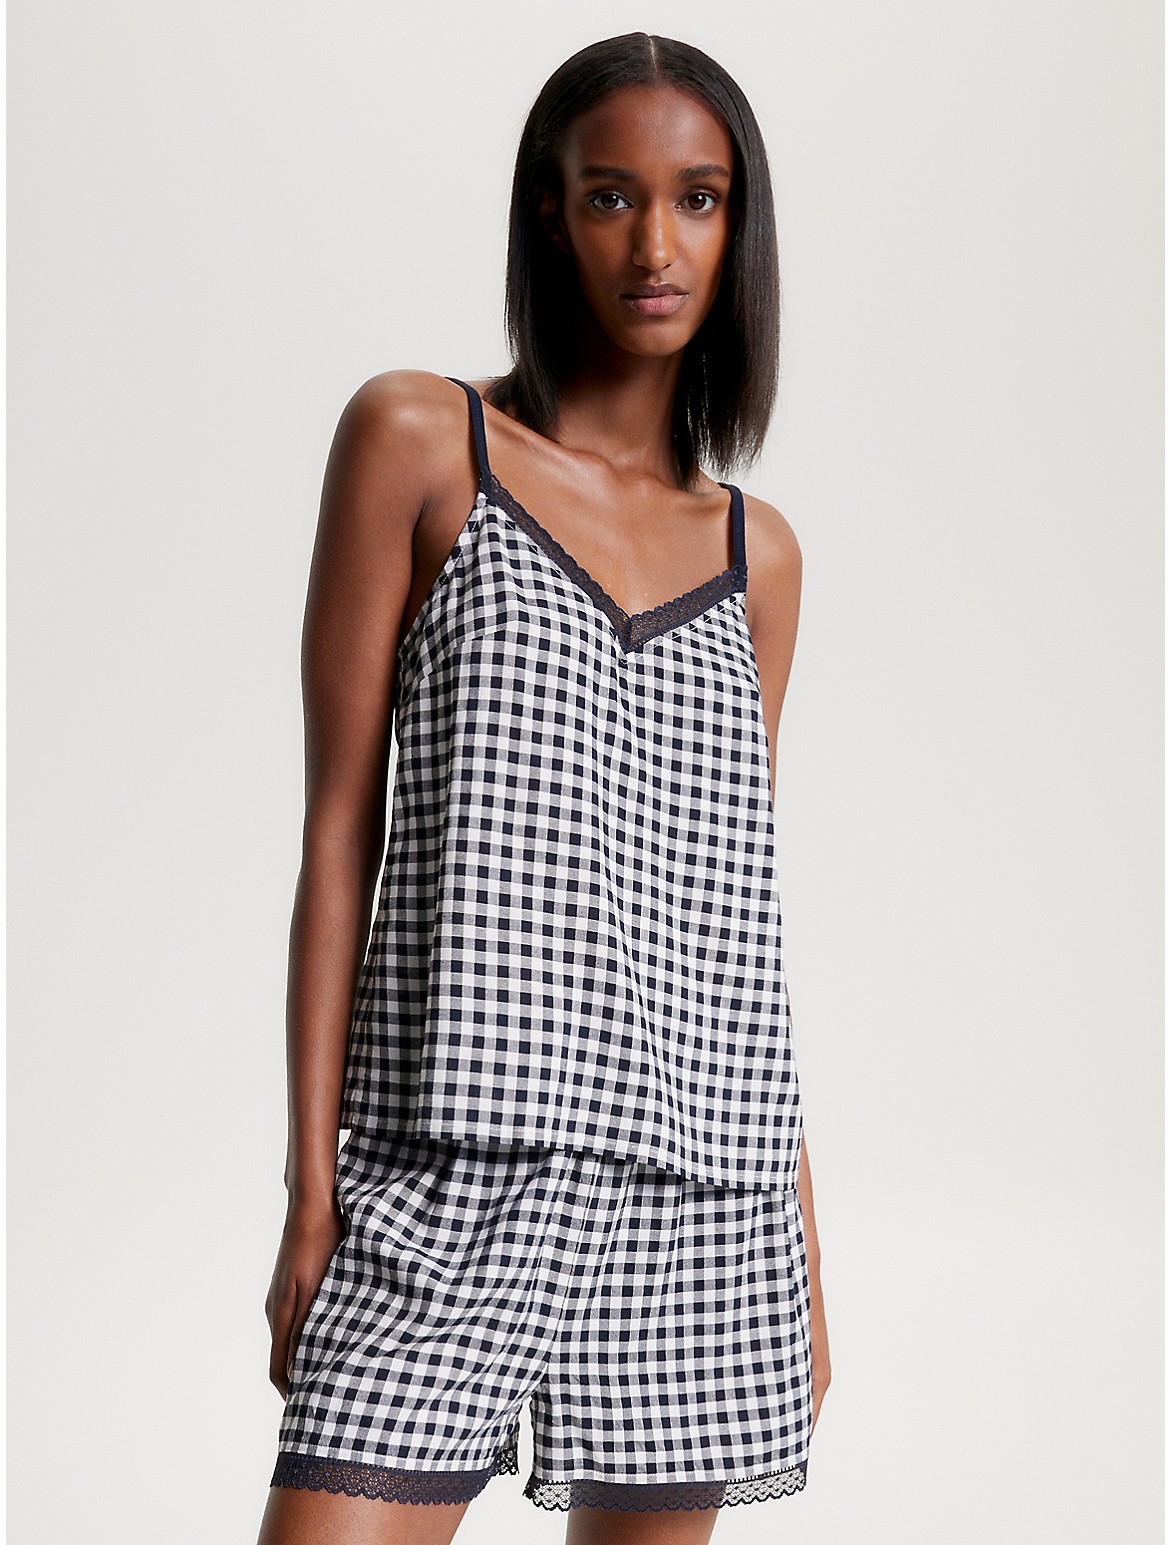 Tommy Hilfiger Women's Gingham Woven Cami